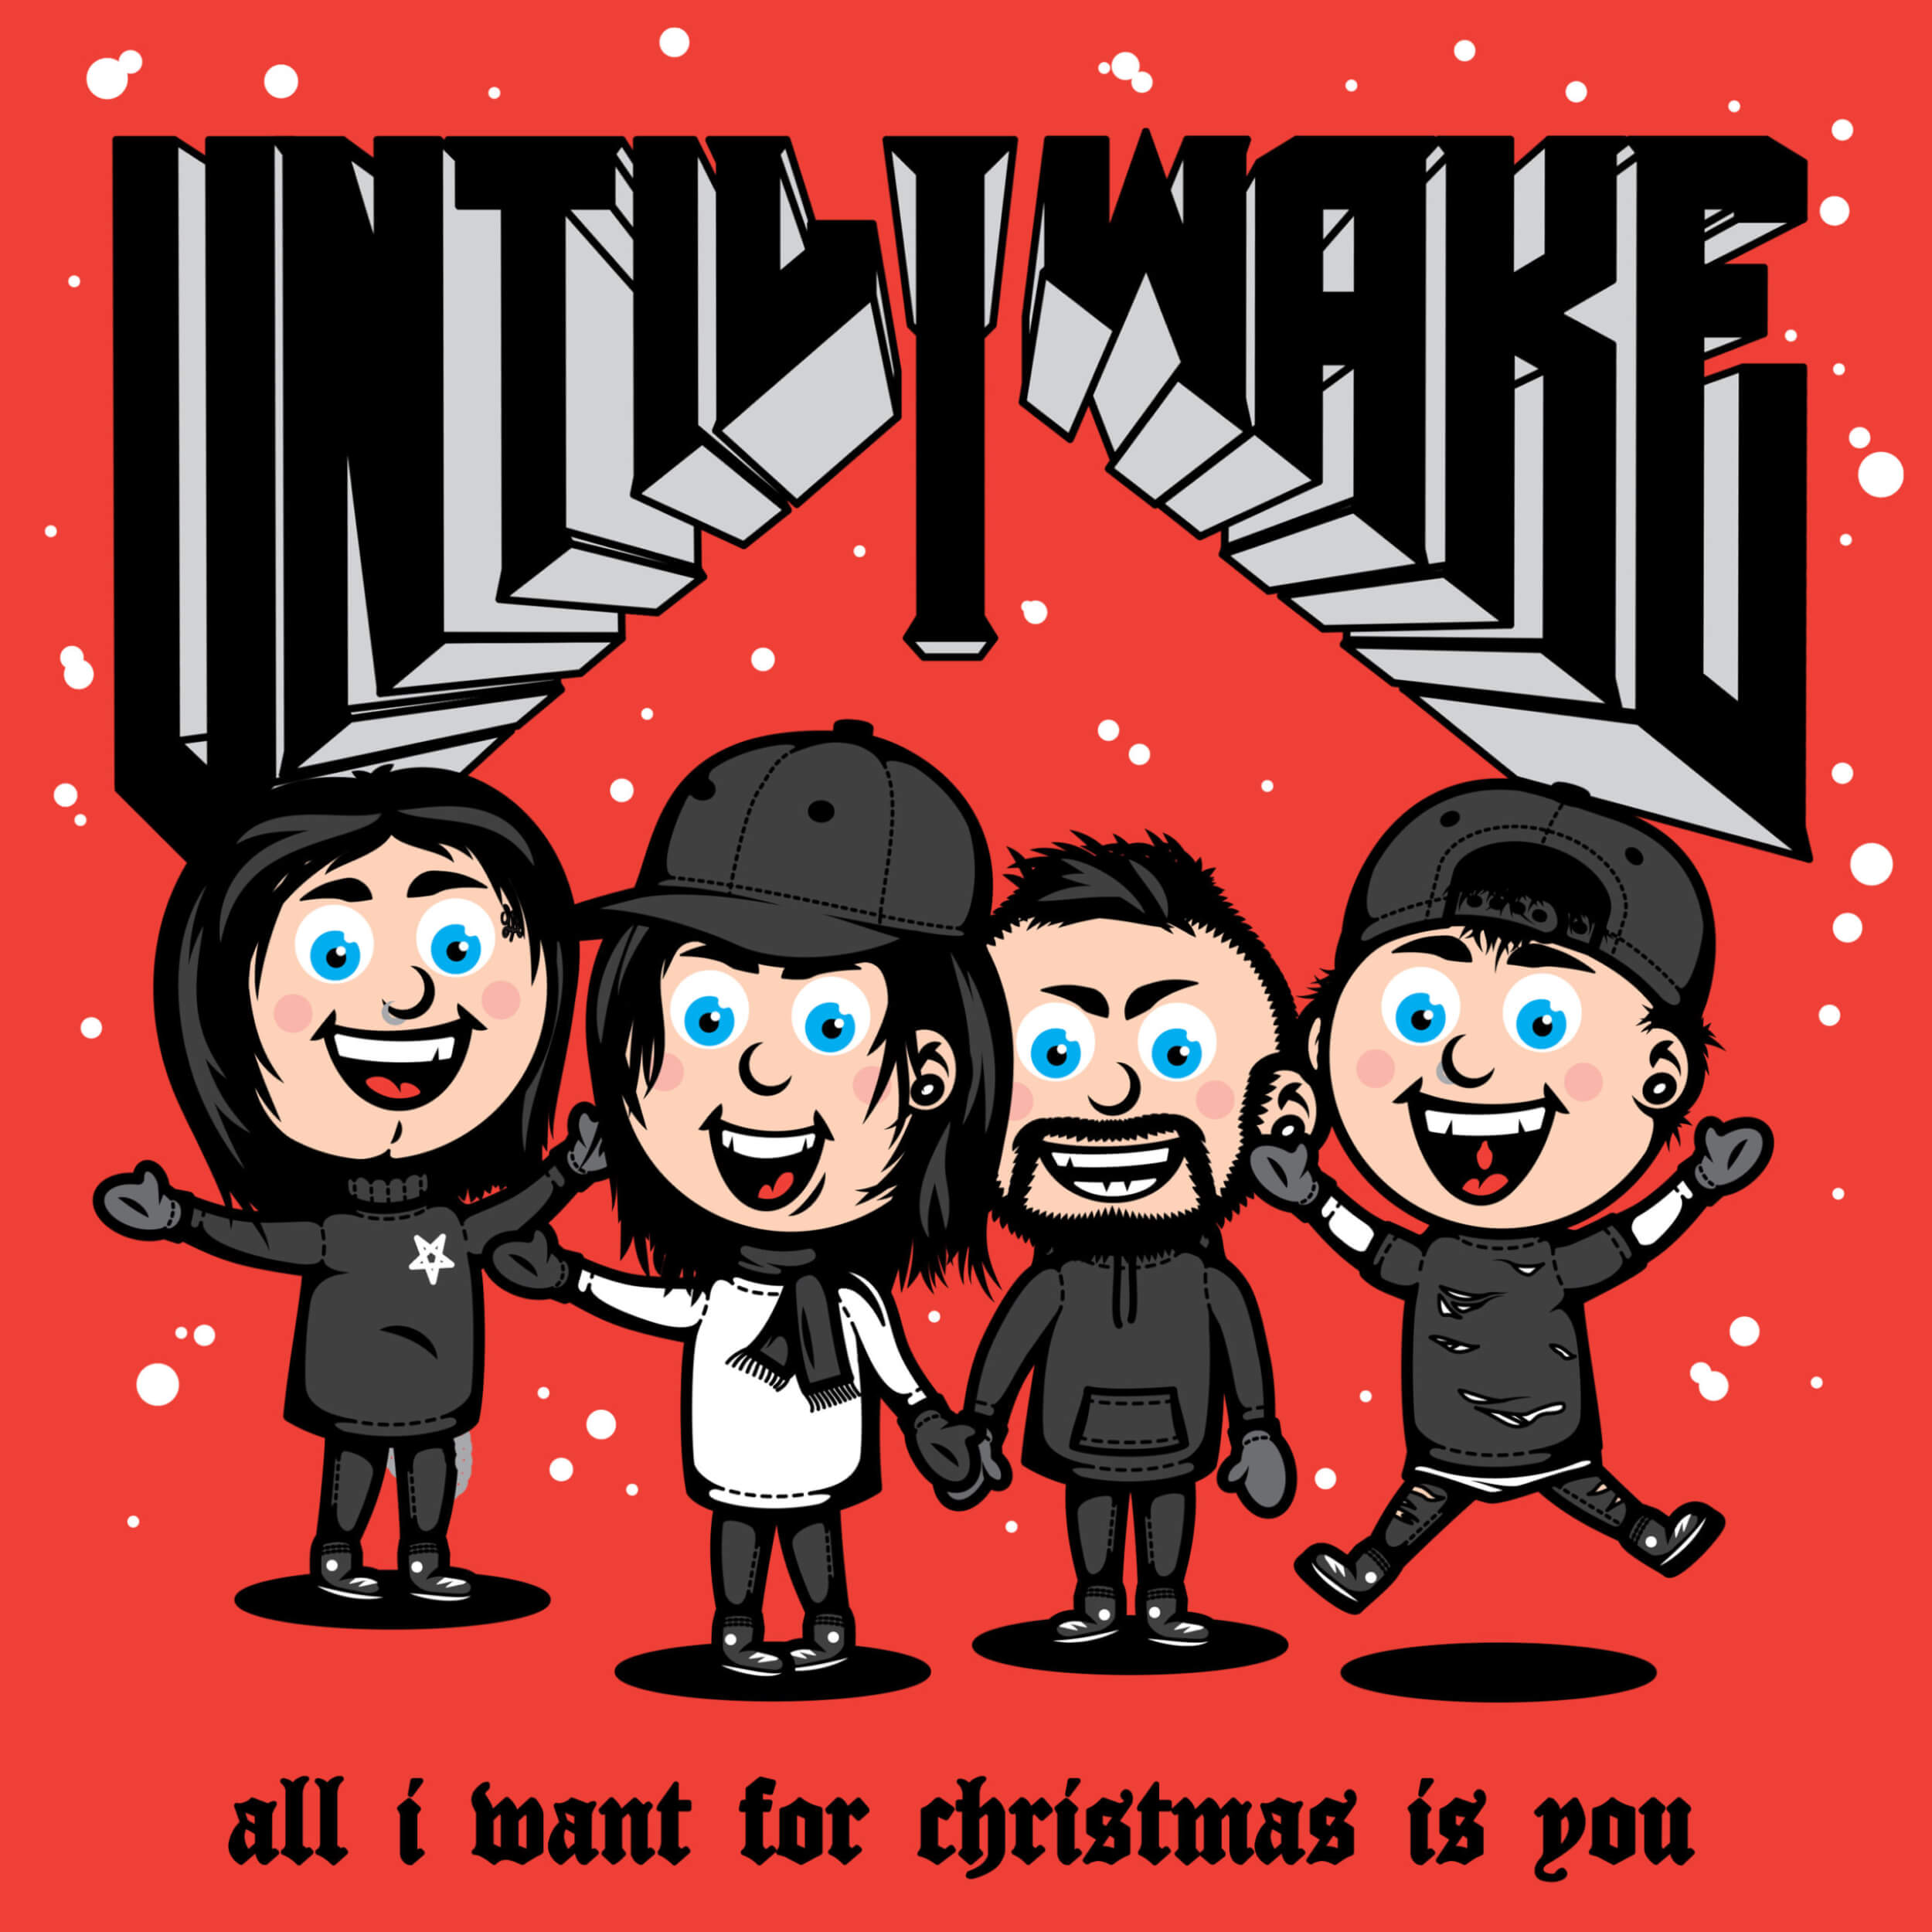 Featured image for “All I Want For Christmas Is You”